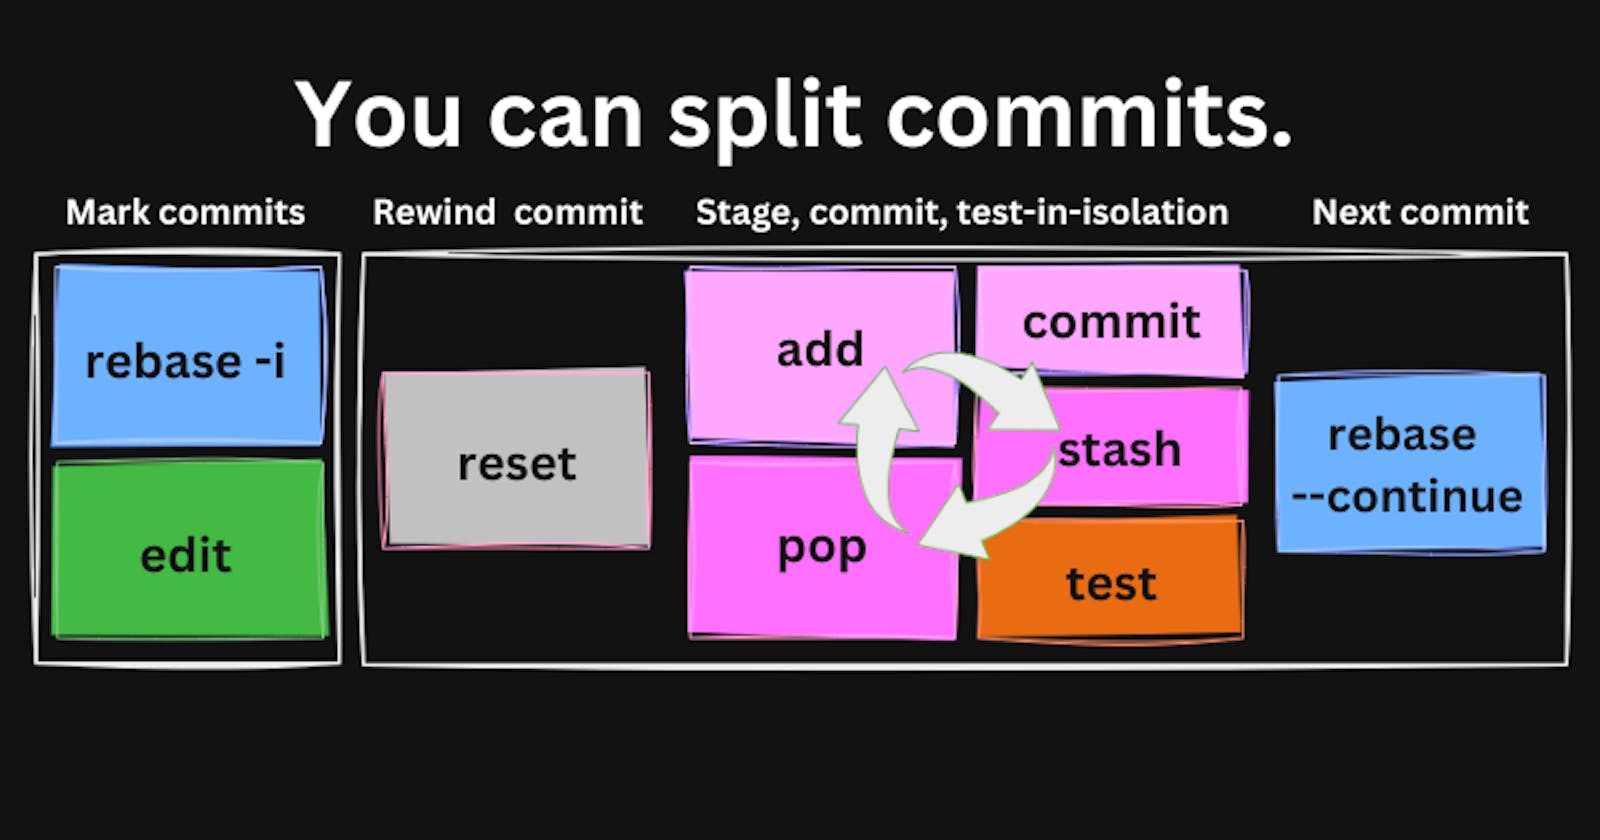 You can split commits.